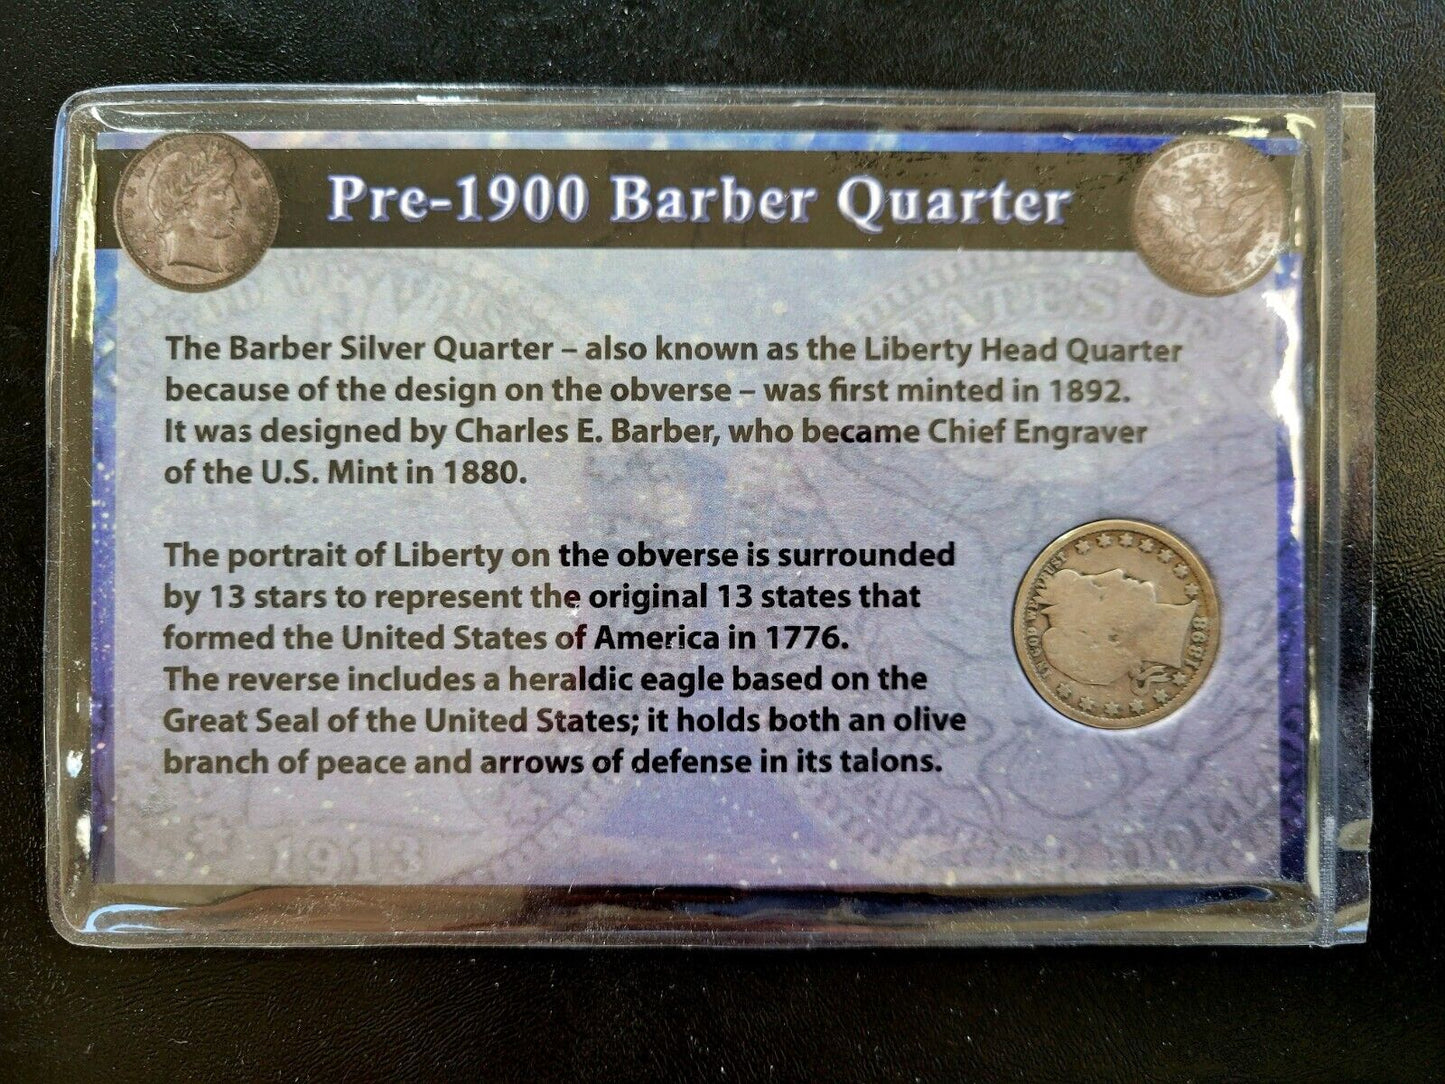 1898 Sealed Pre-1900 Barber Quarter from the First Commemorative Mint Inc.